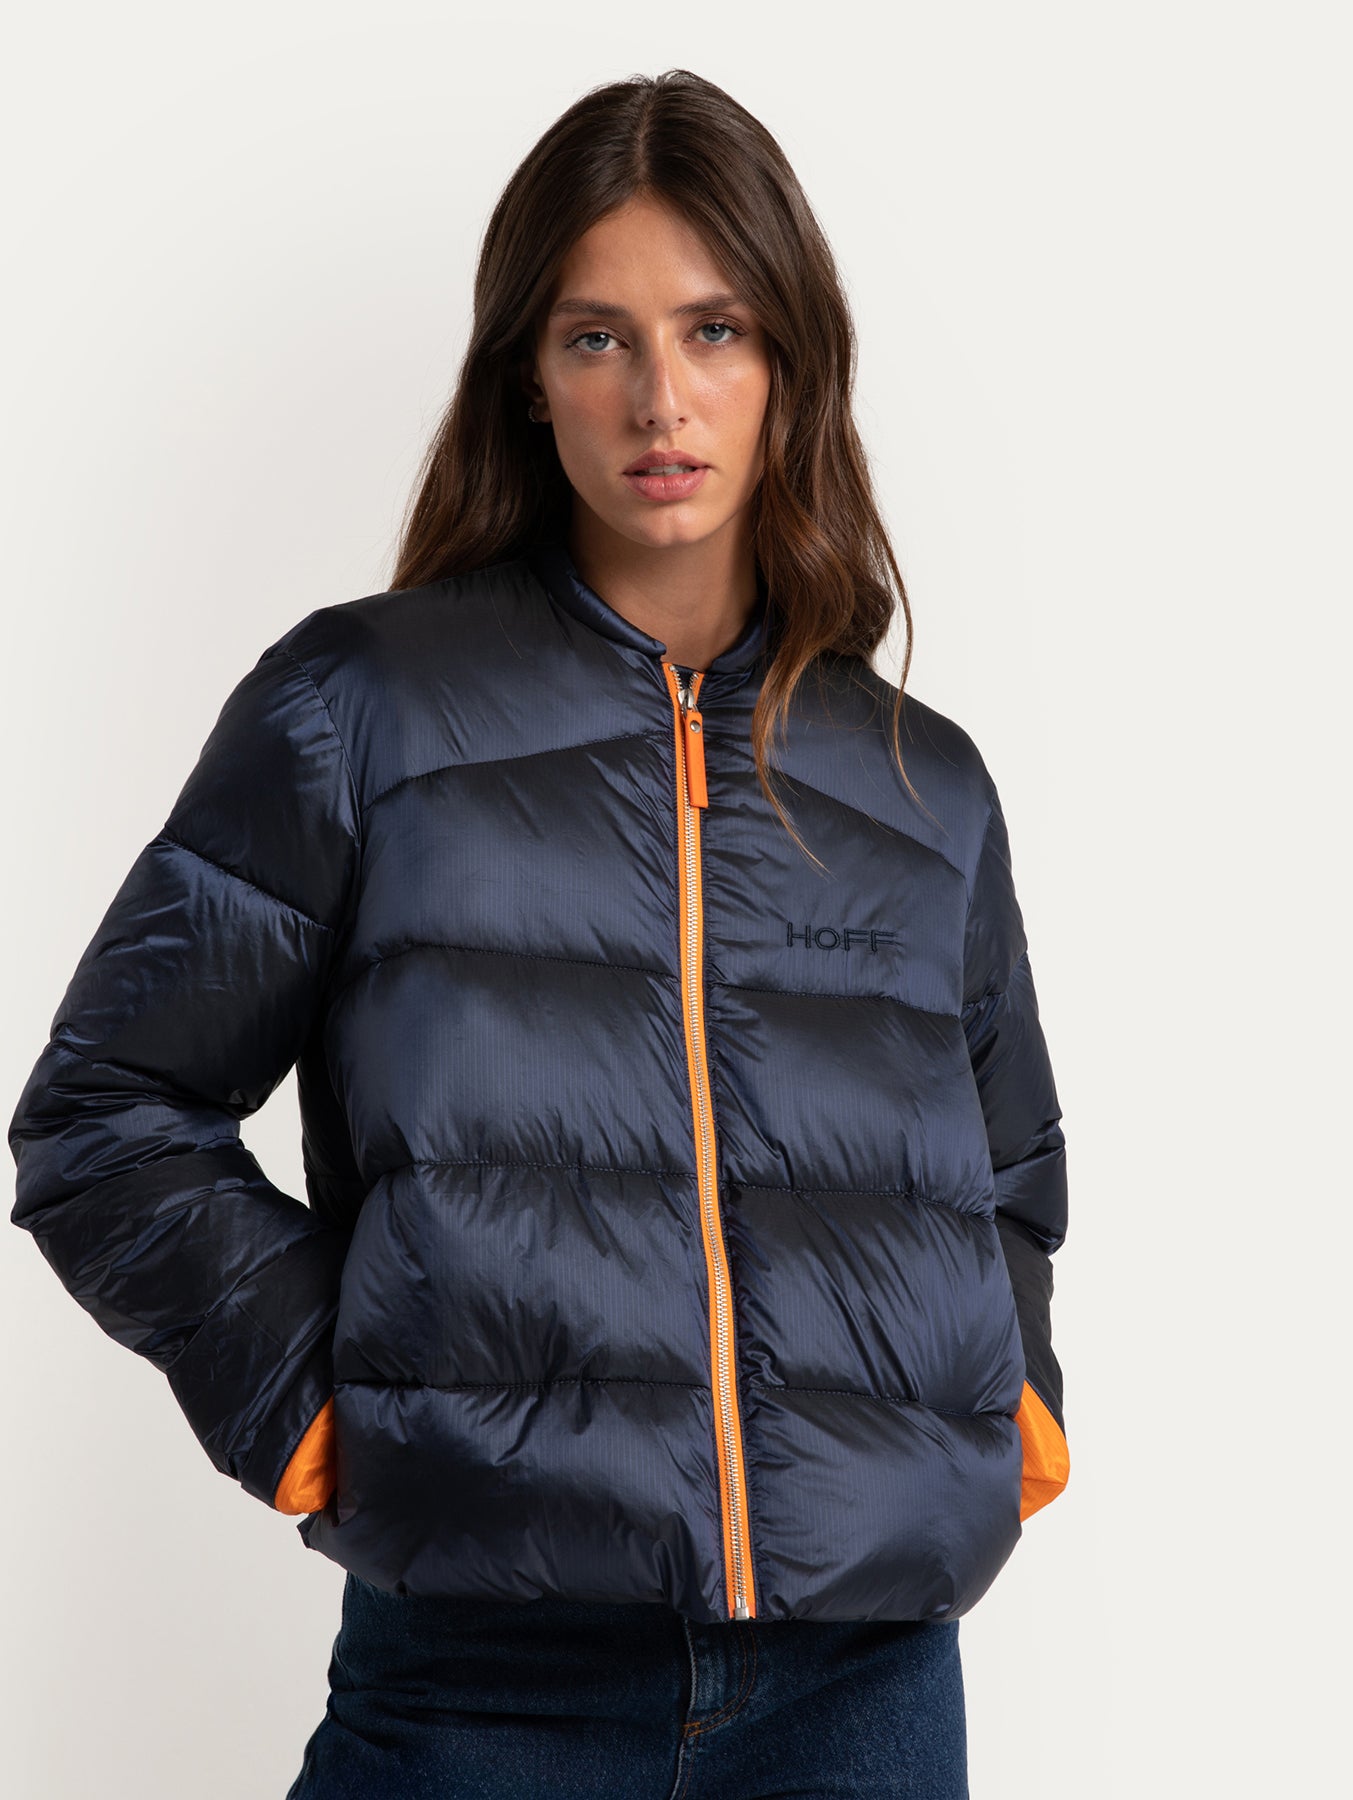 NAVY BLUE FRANKIE SHORT QUILTED JACKET 